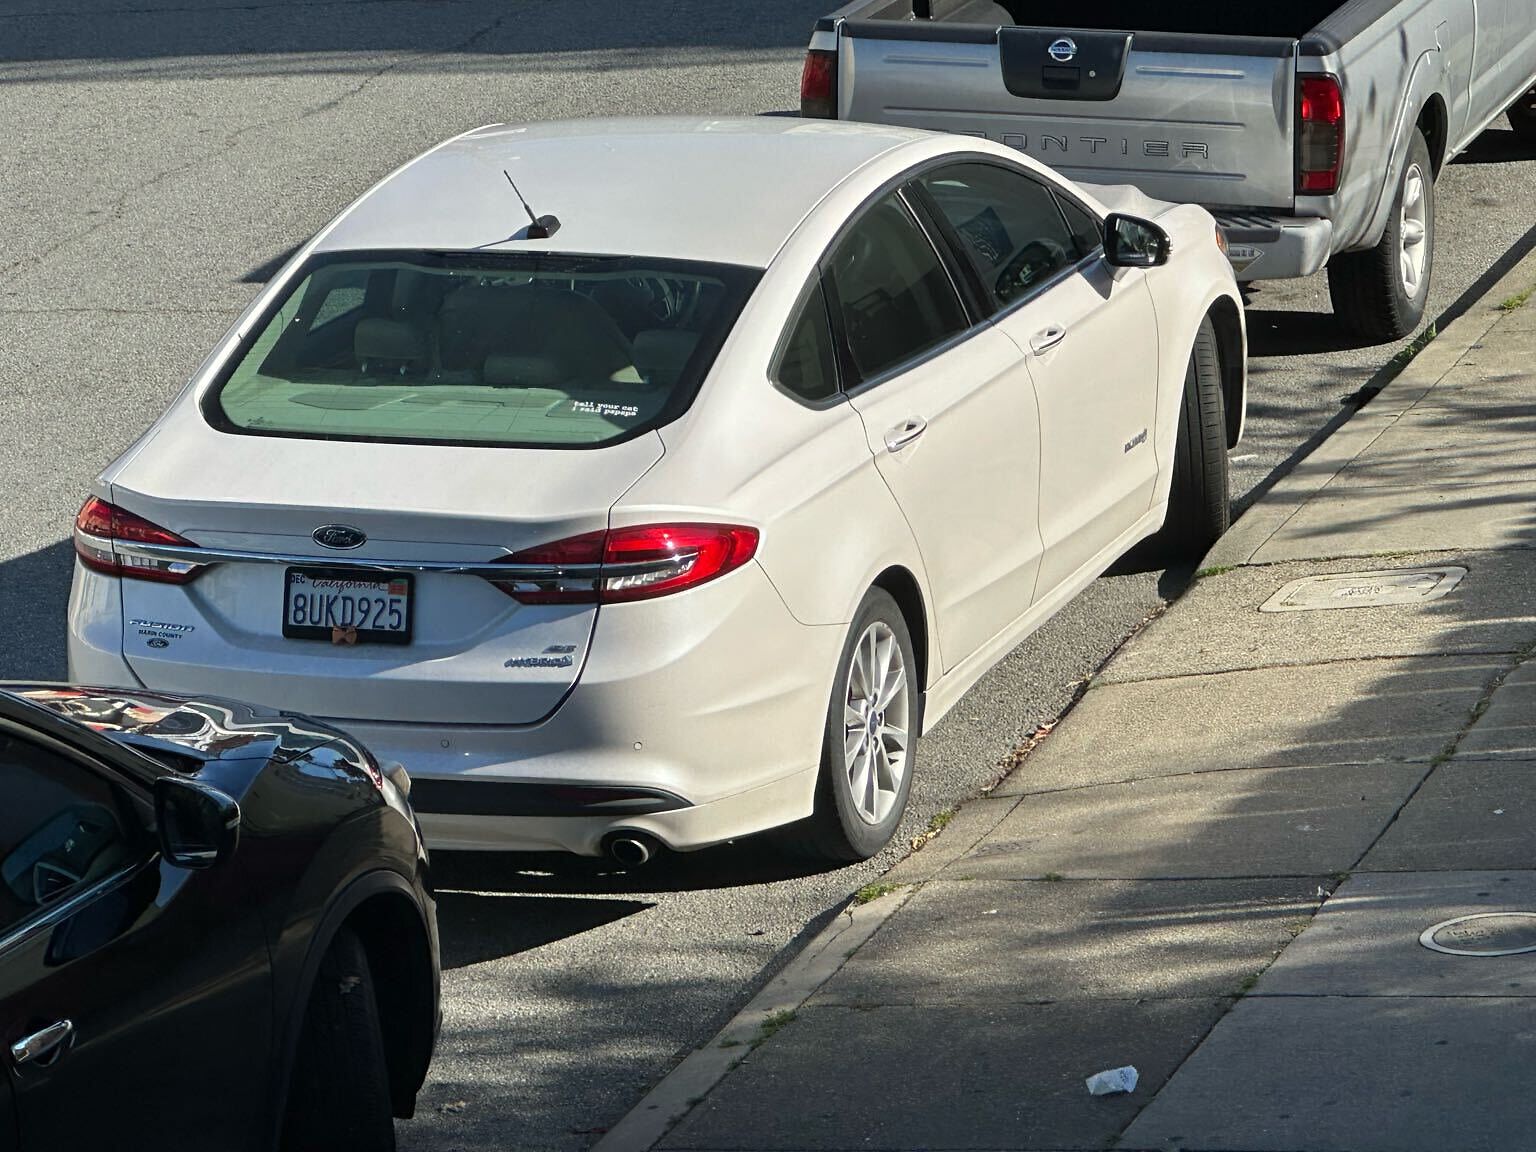 Photo of car in the street with license plate 8UKD925 in California